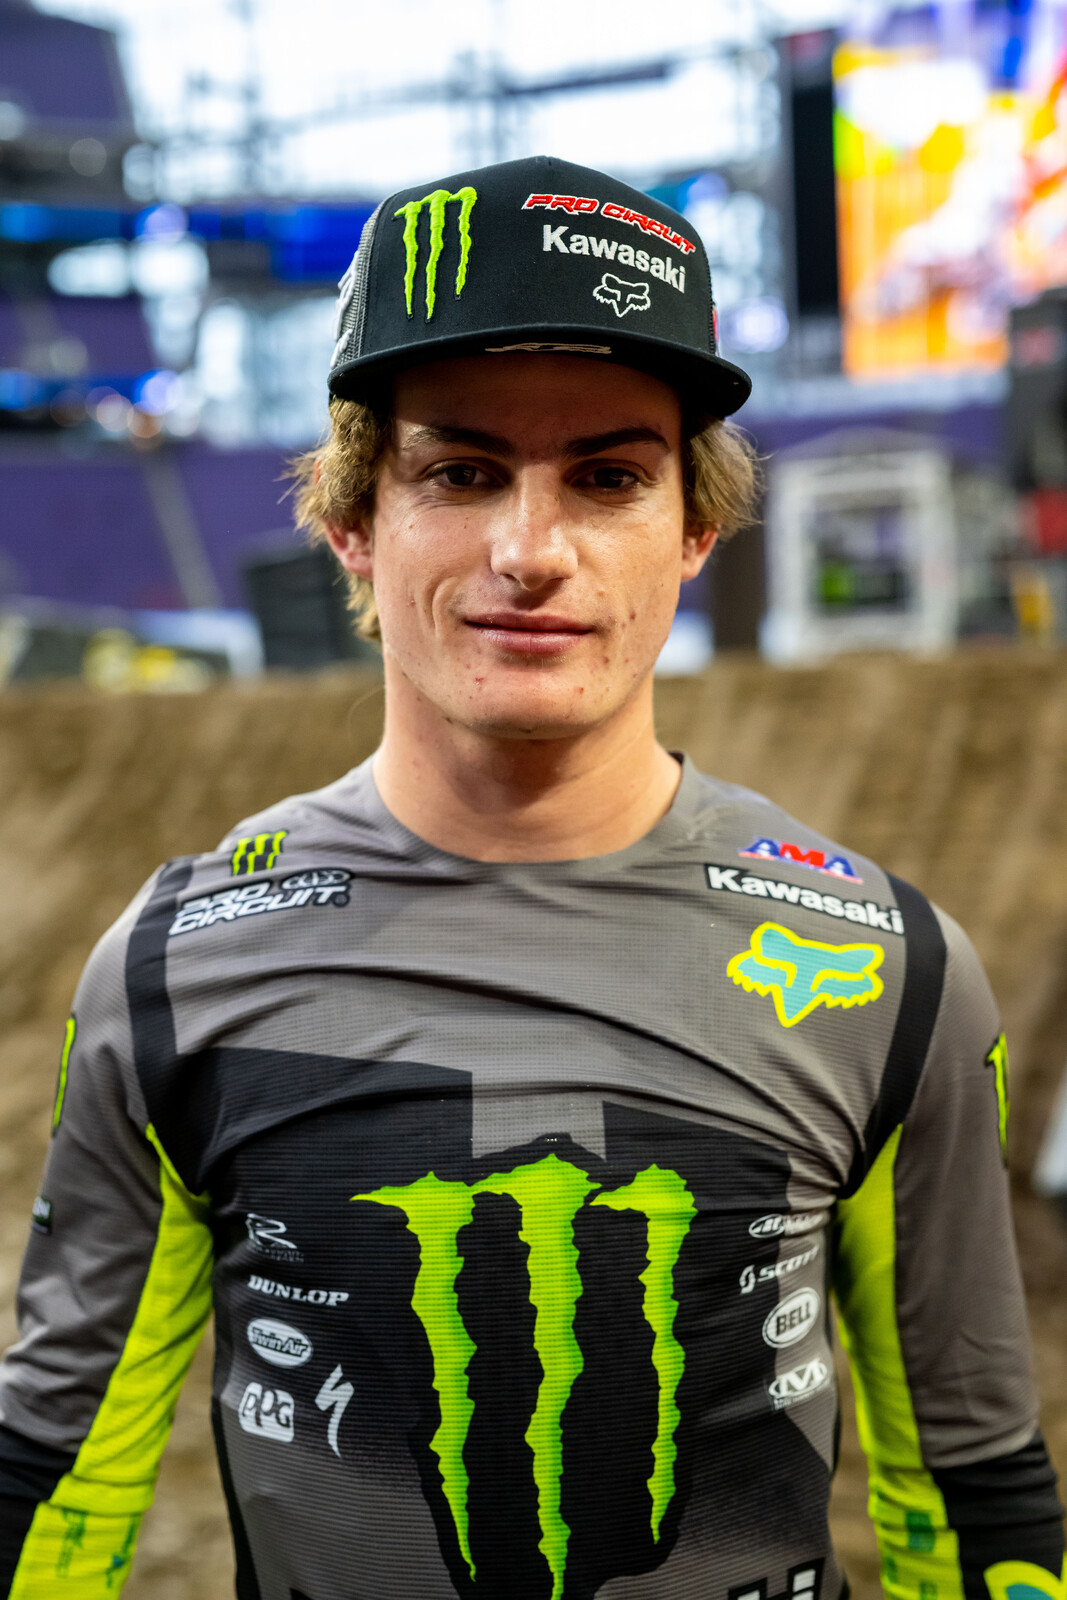 Jett Reynolds on Injuries, Delayed Pro Debut Racer X